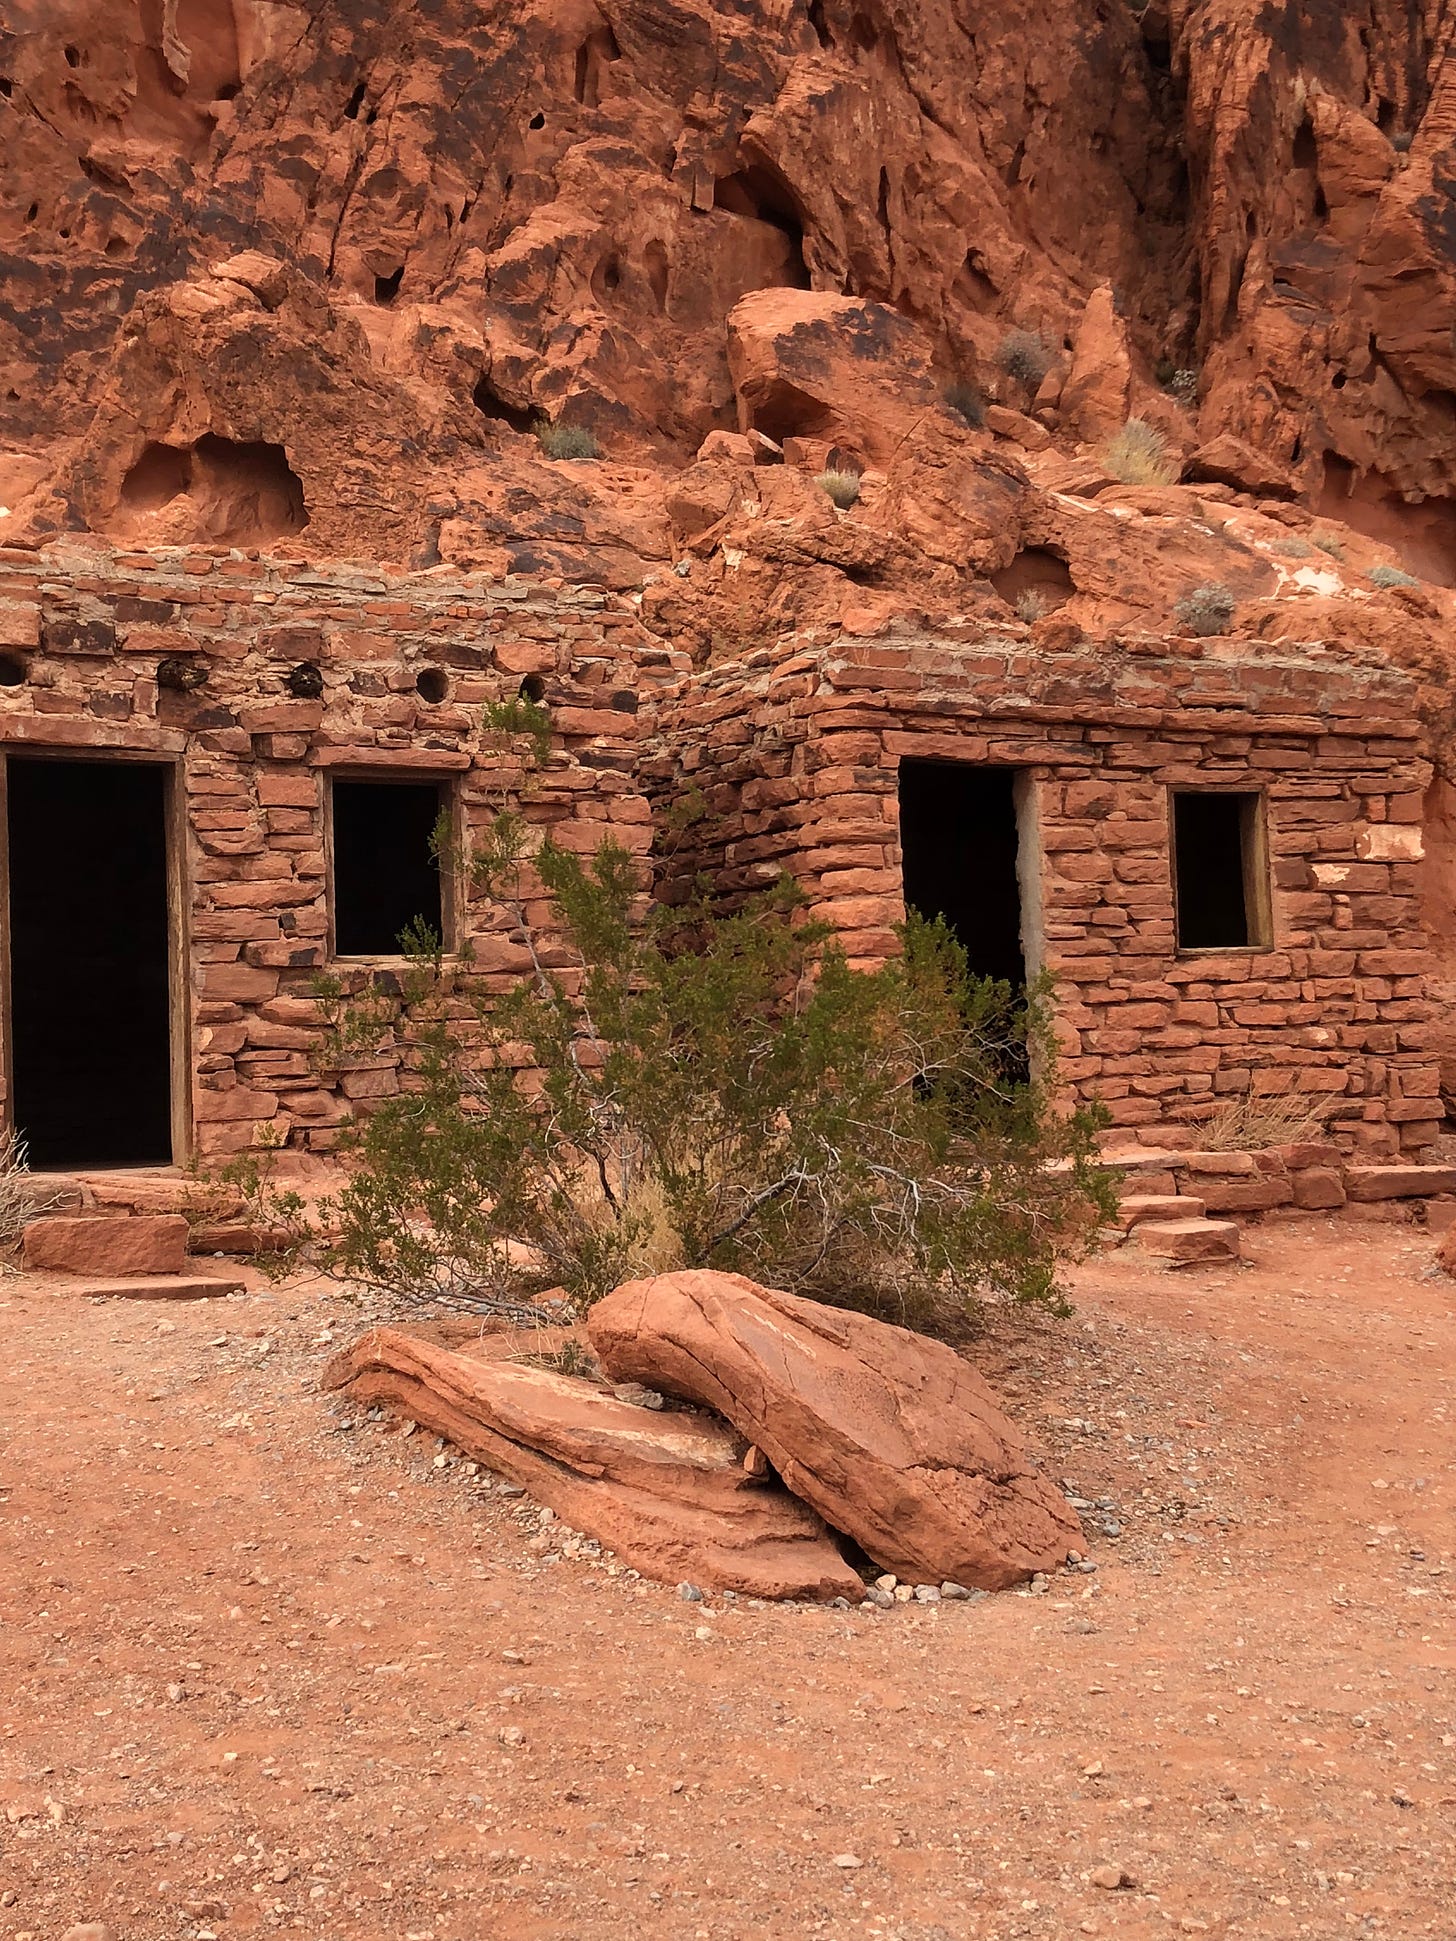 Two adobe brick buildings at the base of a red rock mountain. Each building has an open door and window. in front of the buildings grows a small tree with green leaves behind 2 red rocks, one atop the other.